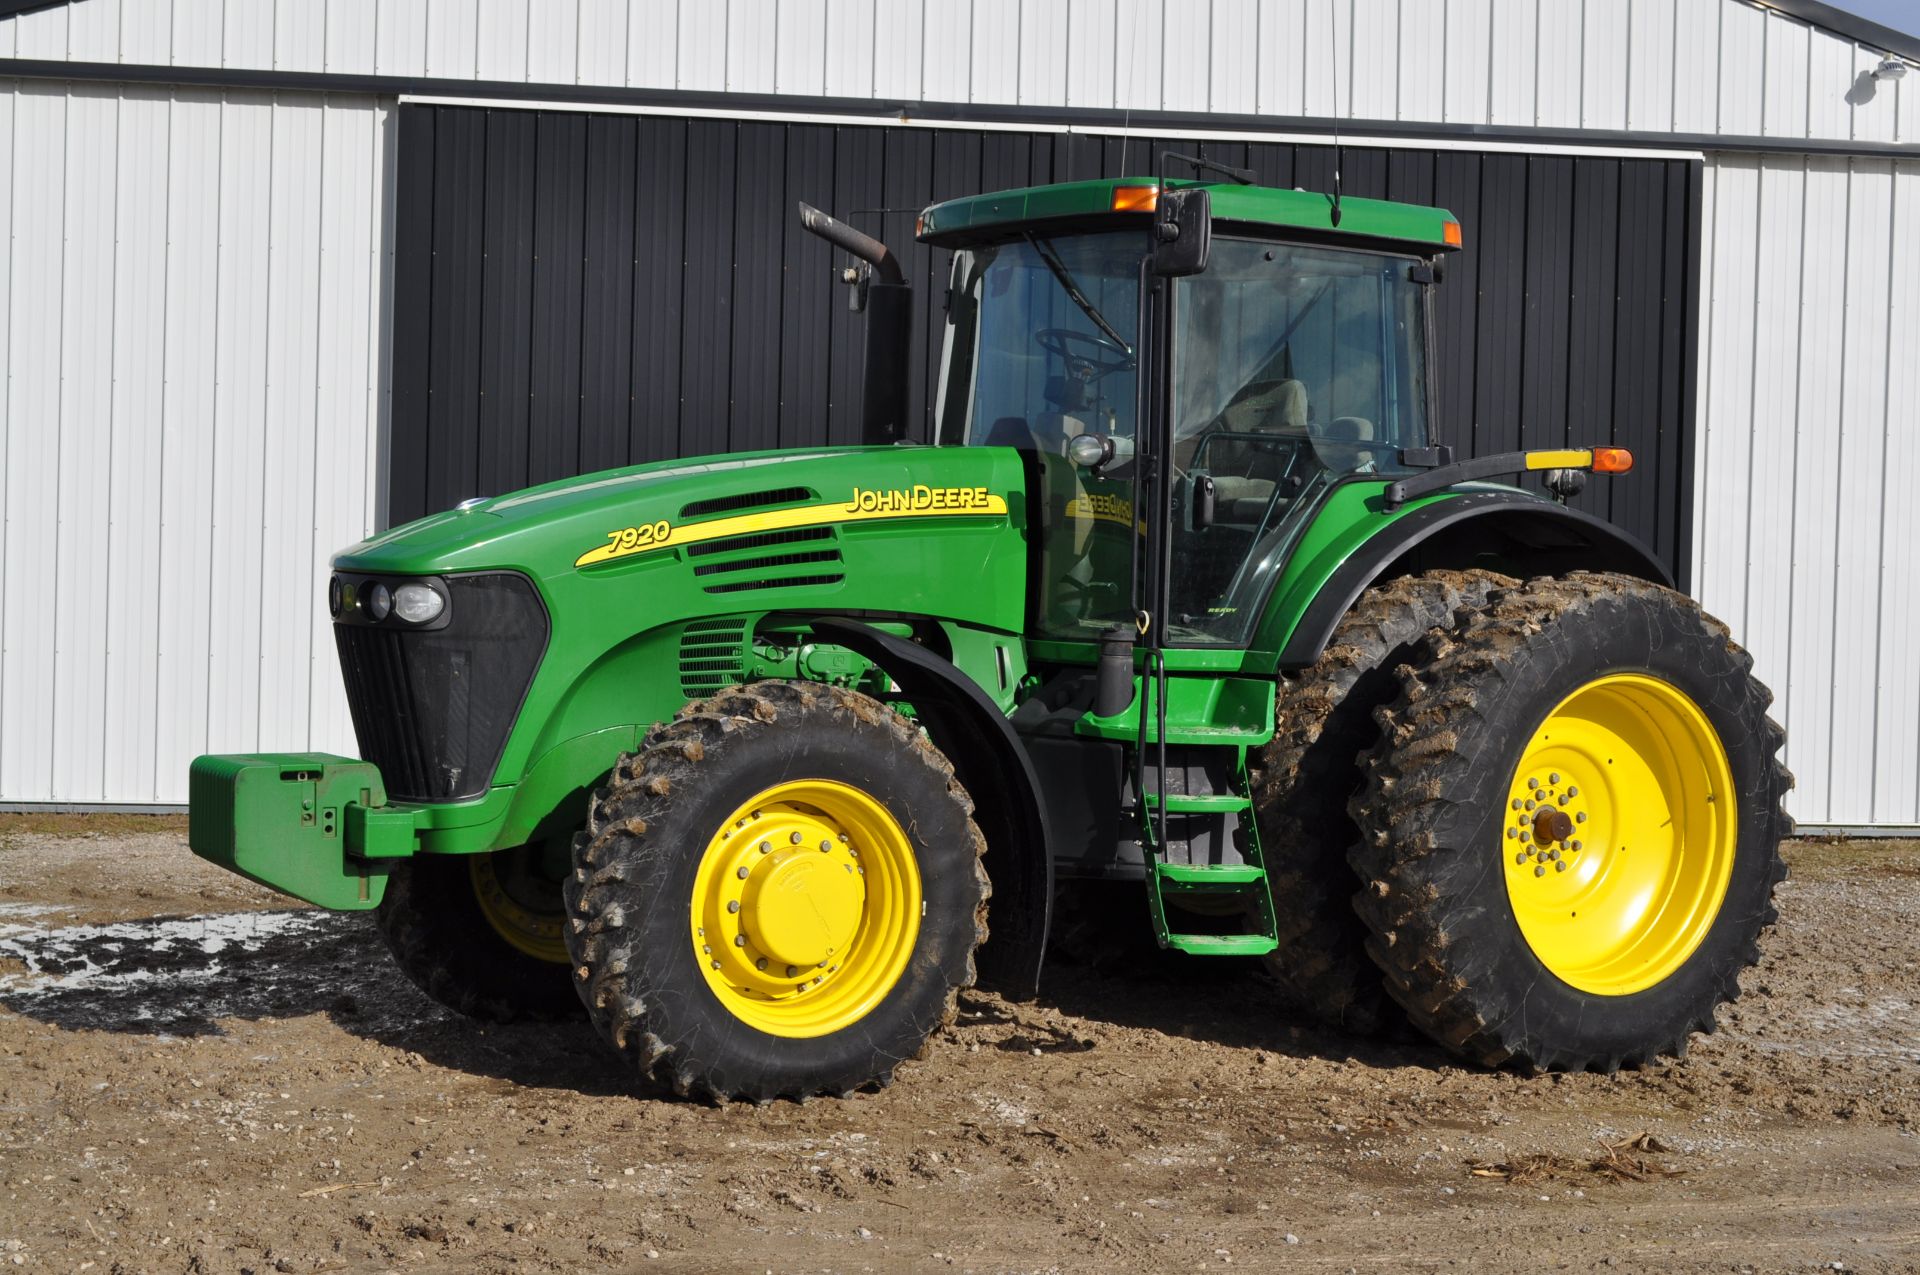 John Deere 7920 tractor, MFWD, IVT, 480/80R42 rear duals, 380/85R30 front, front fenders, front wts, - Image 21 of 33